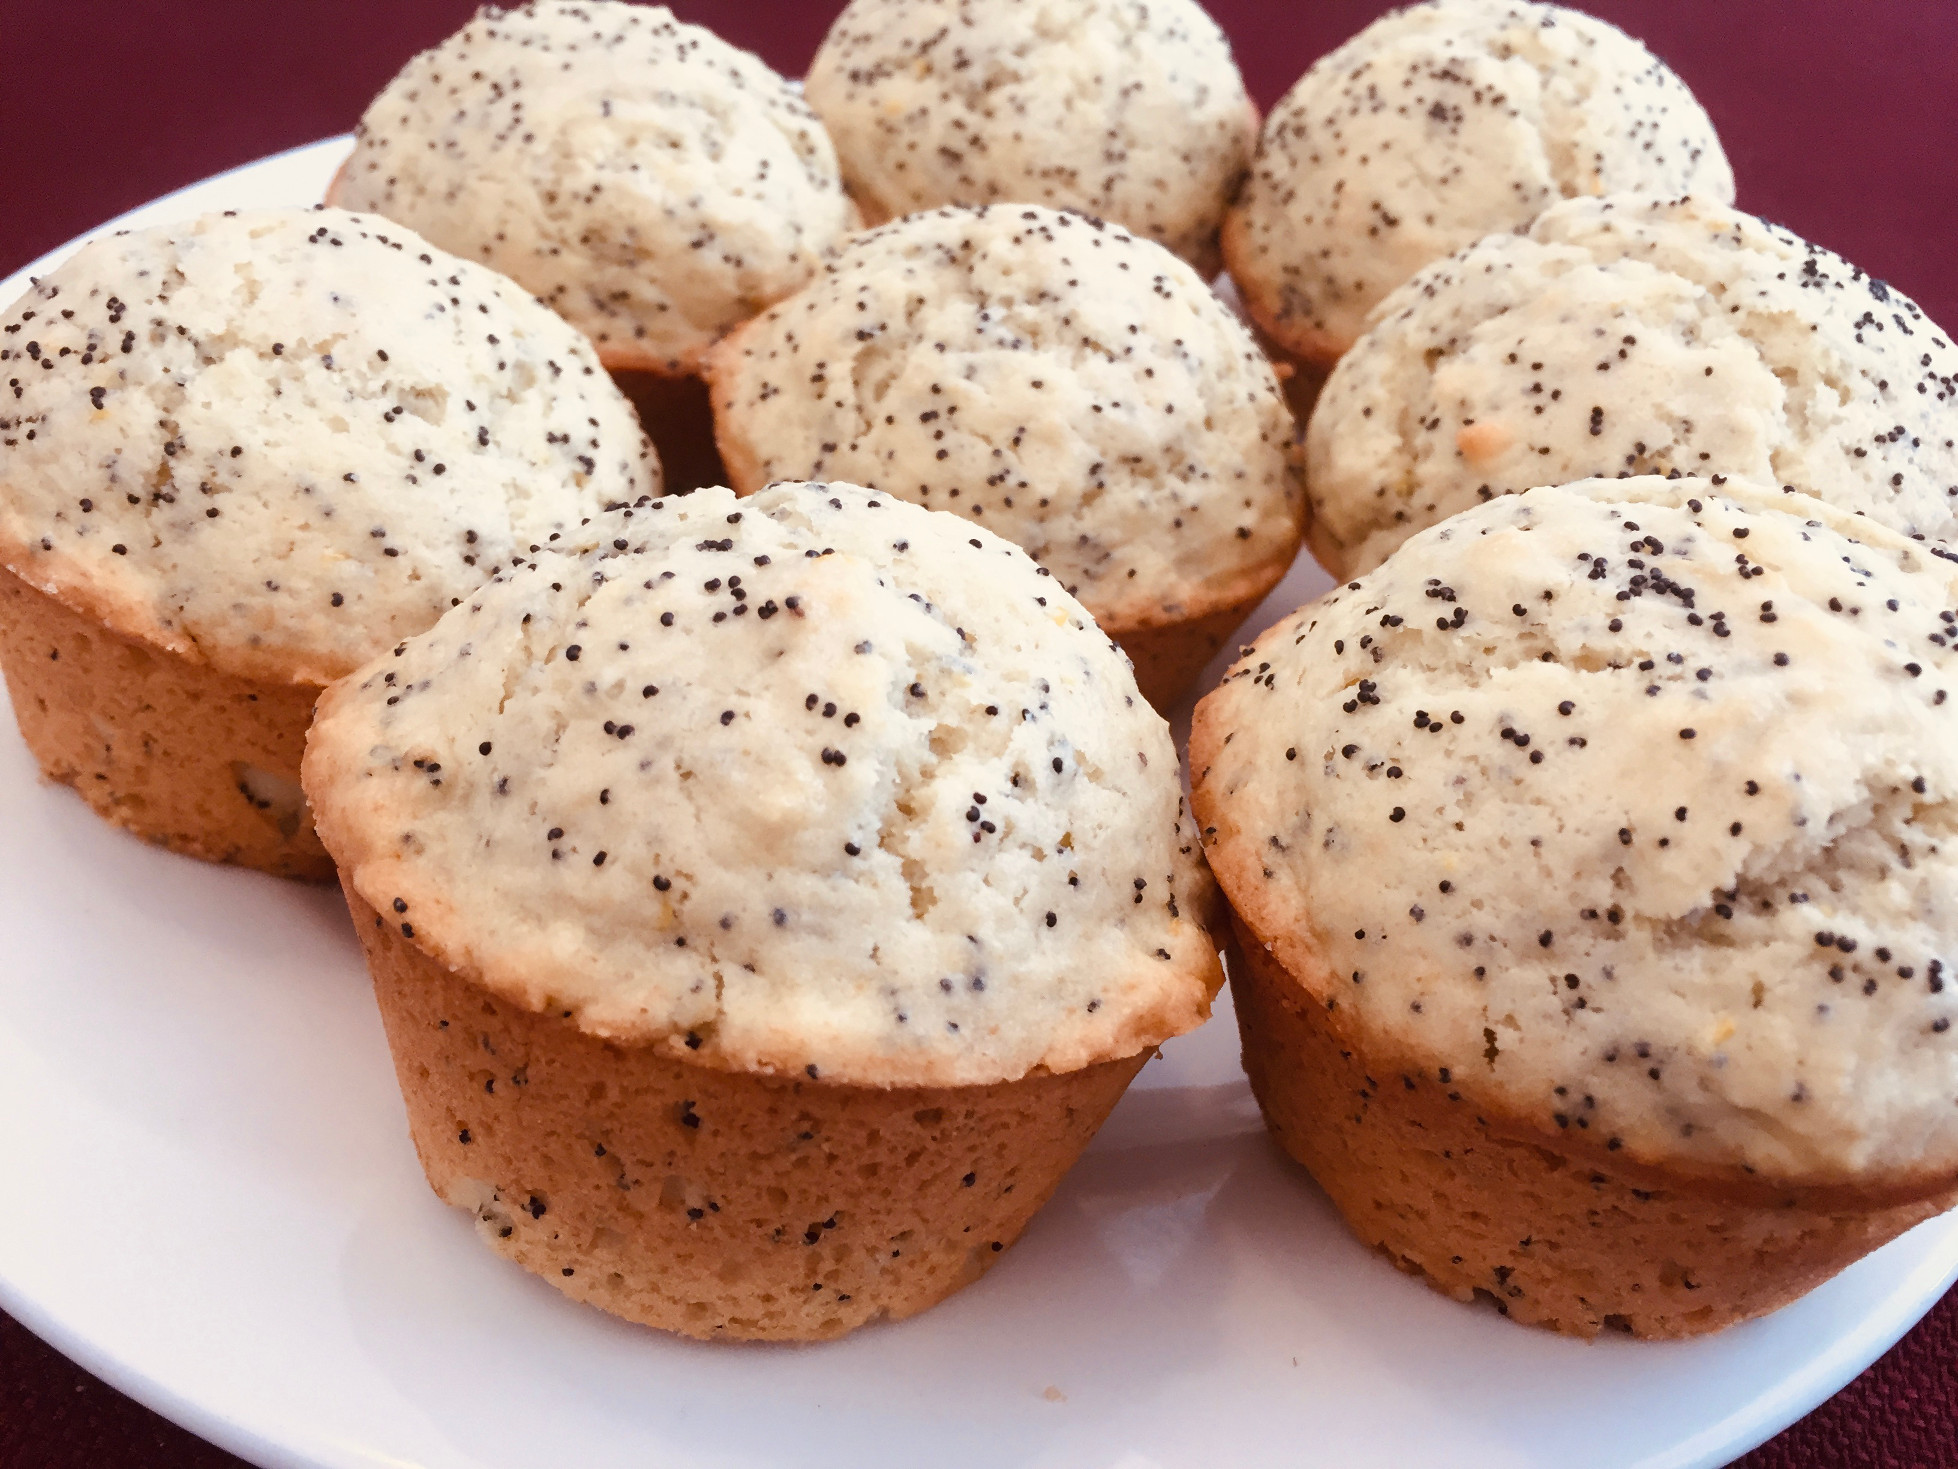 Cooling finished muffins on a white plate Lemon Poppy Seed Muffins baking Those Someday Goals